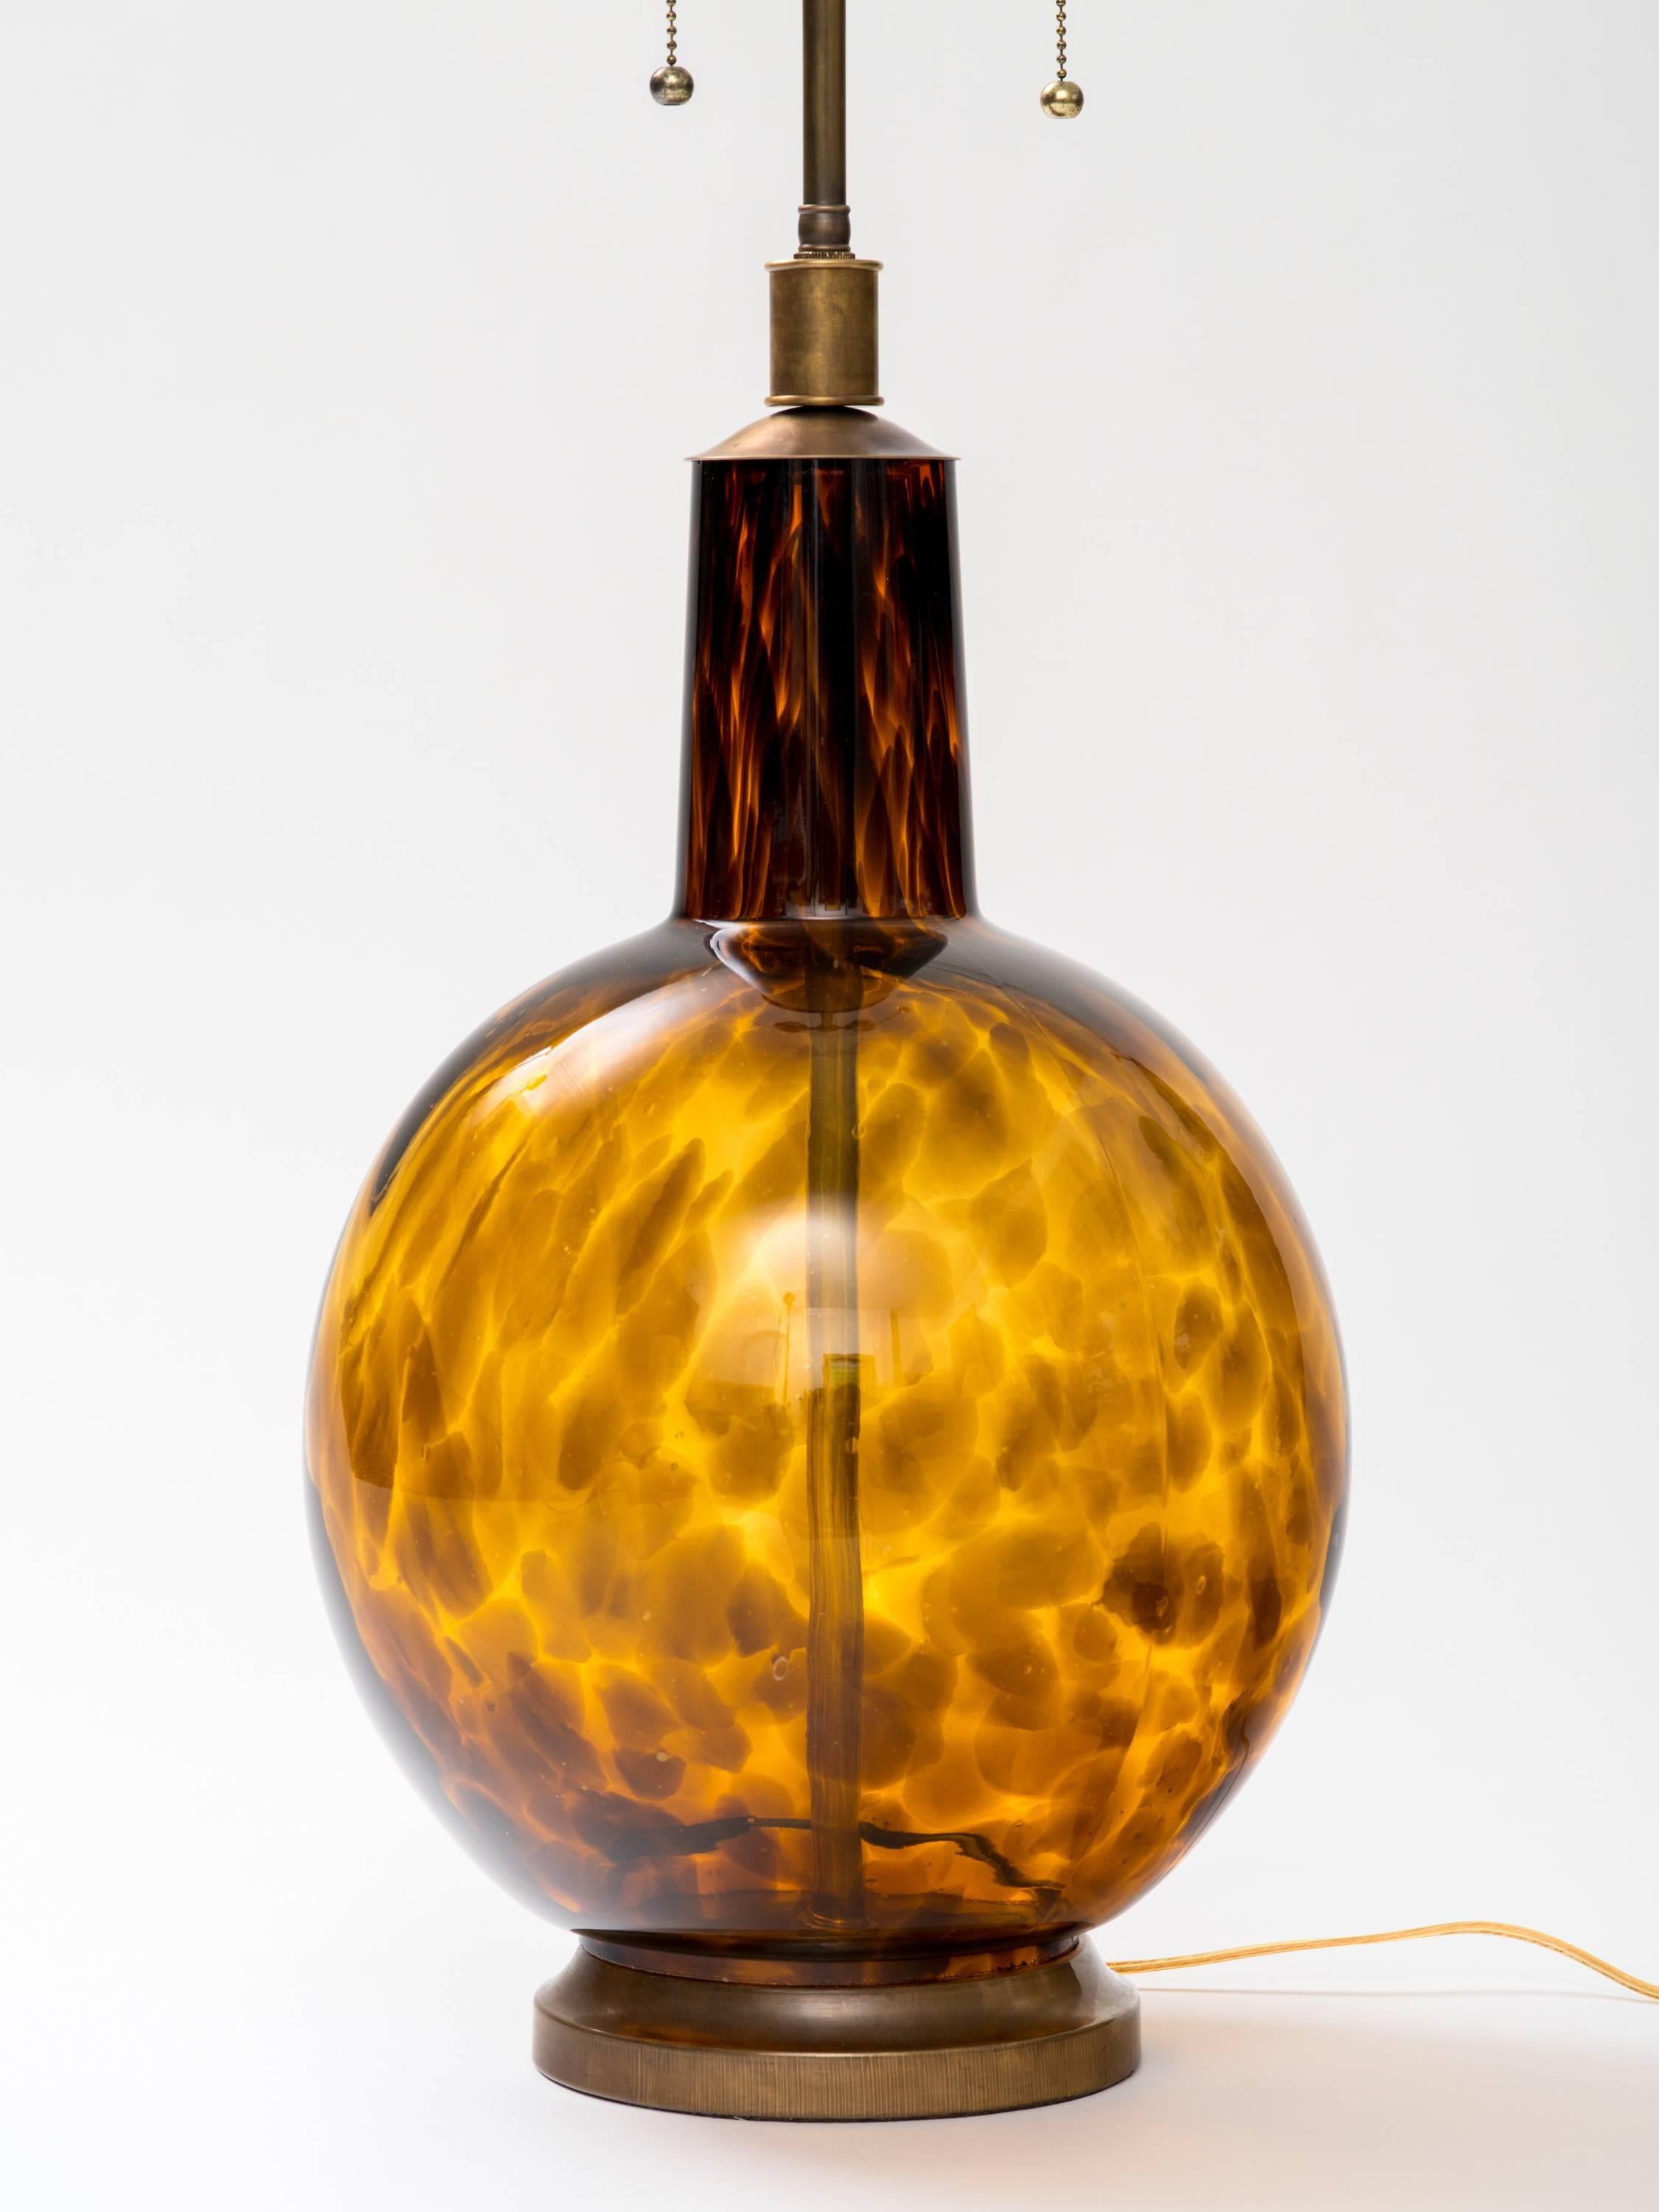 Pair of handblown Italian tortoise shell glass lamps. Newly rewired, with solid brass patinated hardware. Double socketed with pull chains. Not UL listed.
Lamp body measures 21